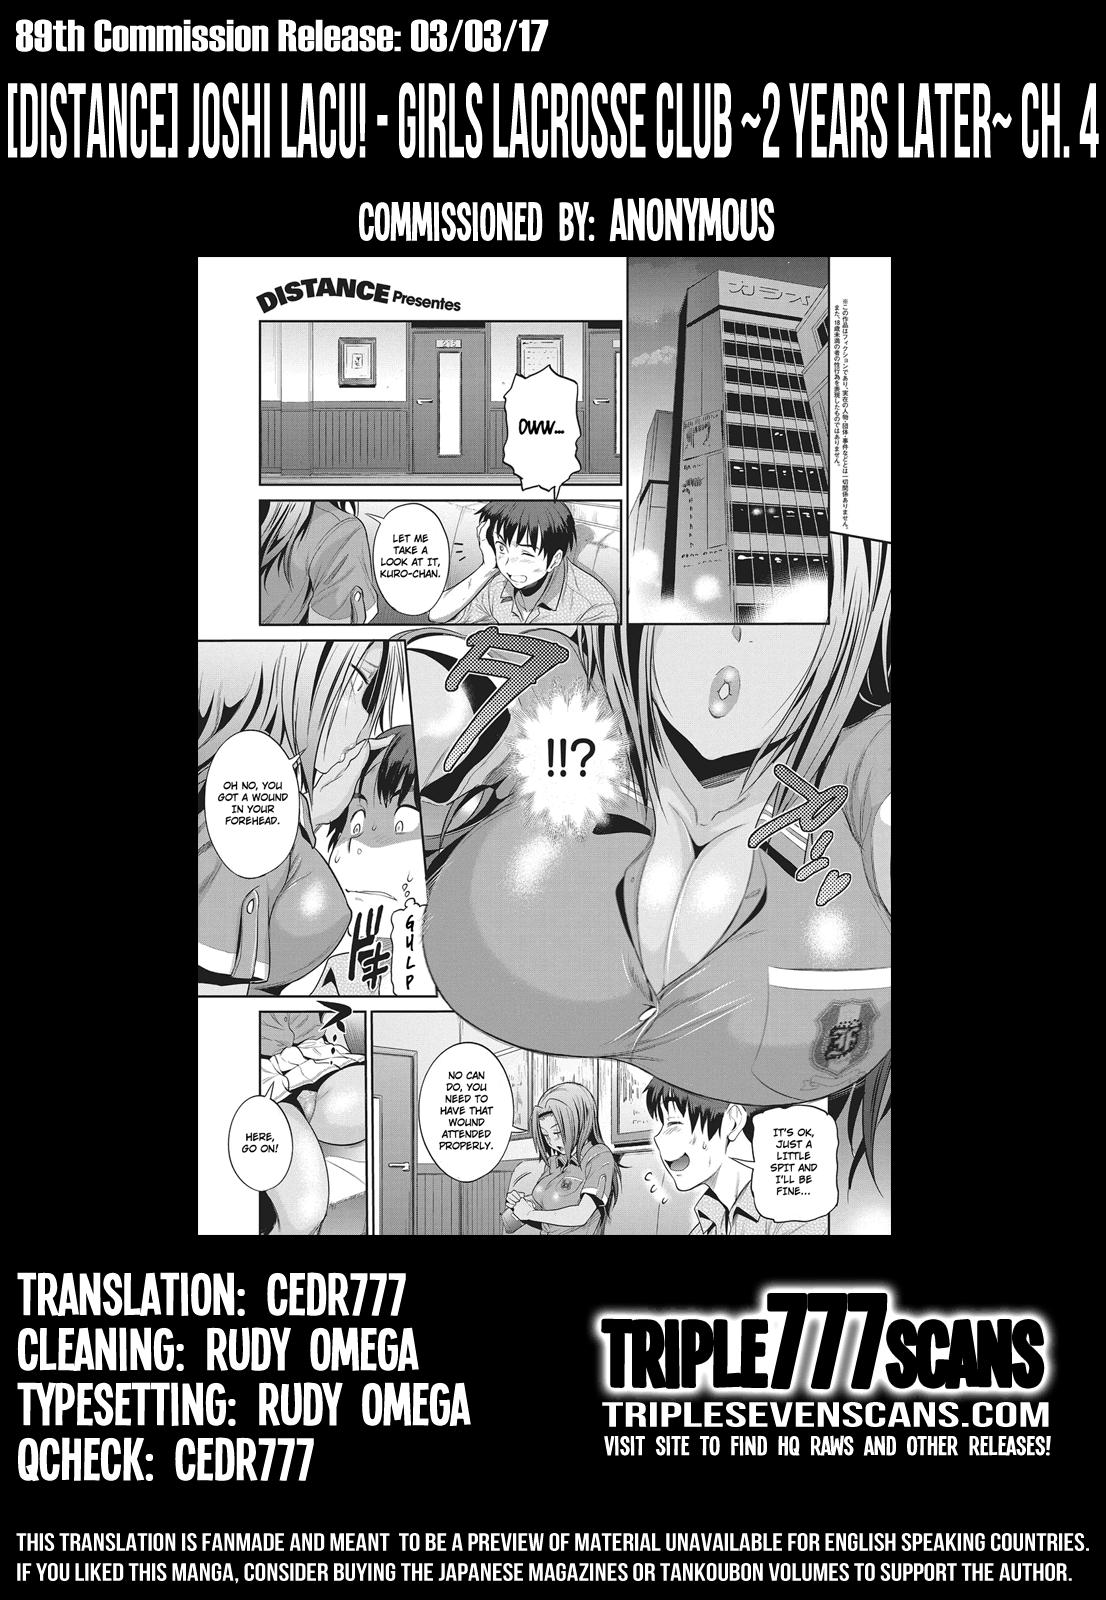 Asian Babes [DISTANCE] Joshi Lacu! - Girls Lacrosse Club ~2 Years Later~ Ch. 4 (COMIC ExE 05) [English] [TripleSevenScans] [Digital] Roundass - Page 42